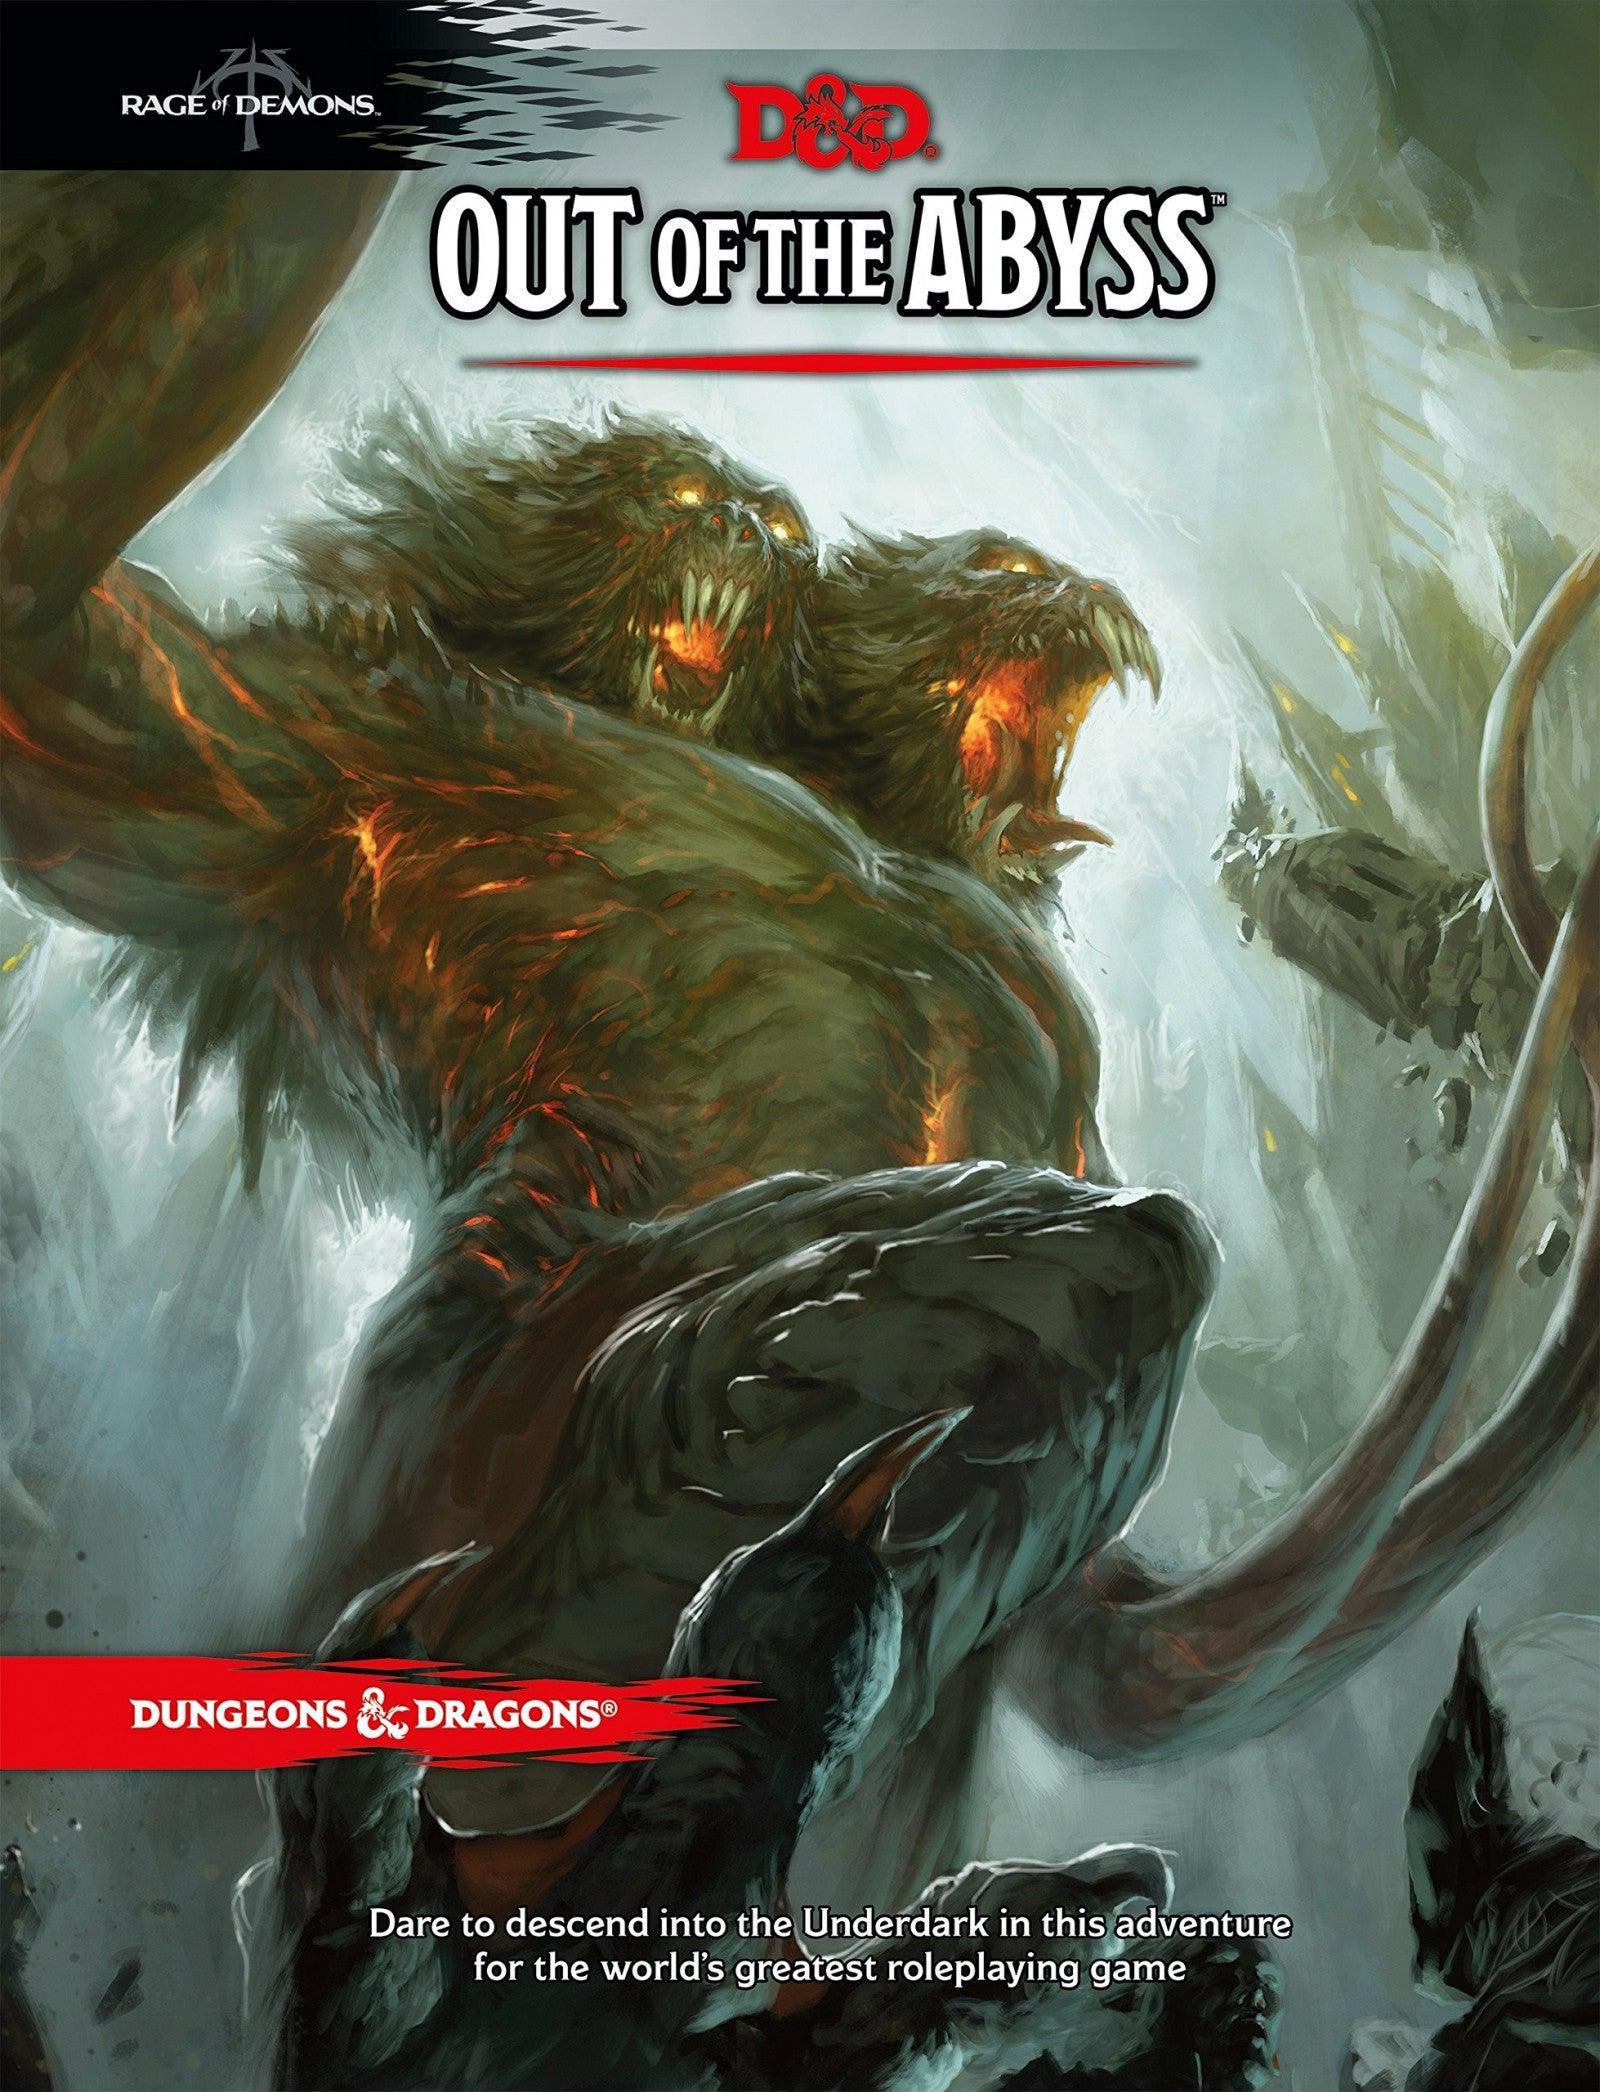 D&D Dungeons & Dragons Out of the Abyss Hardcover Wizards of the Coast Titan Pop Culture